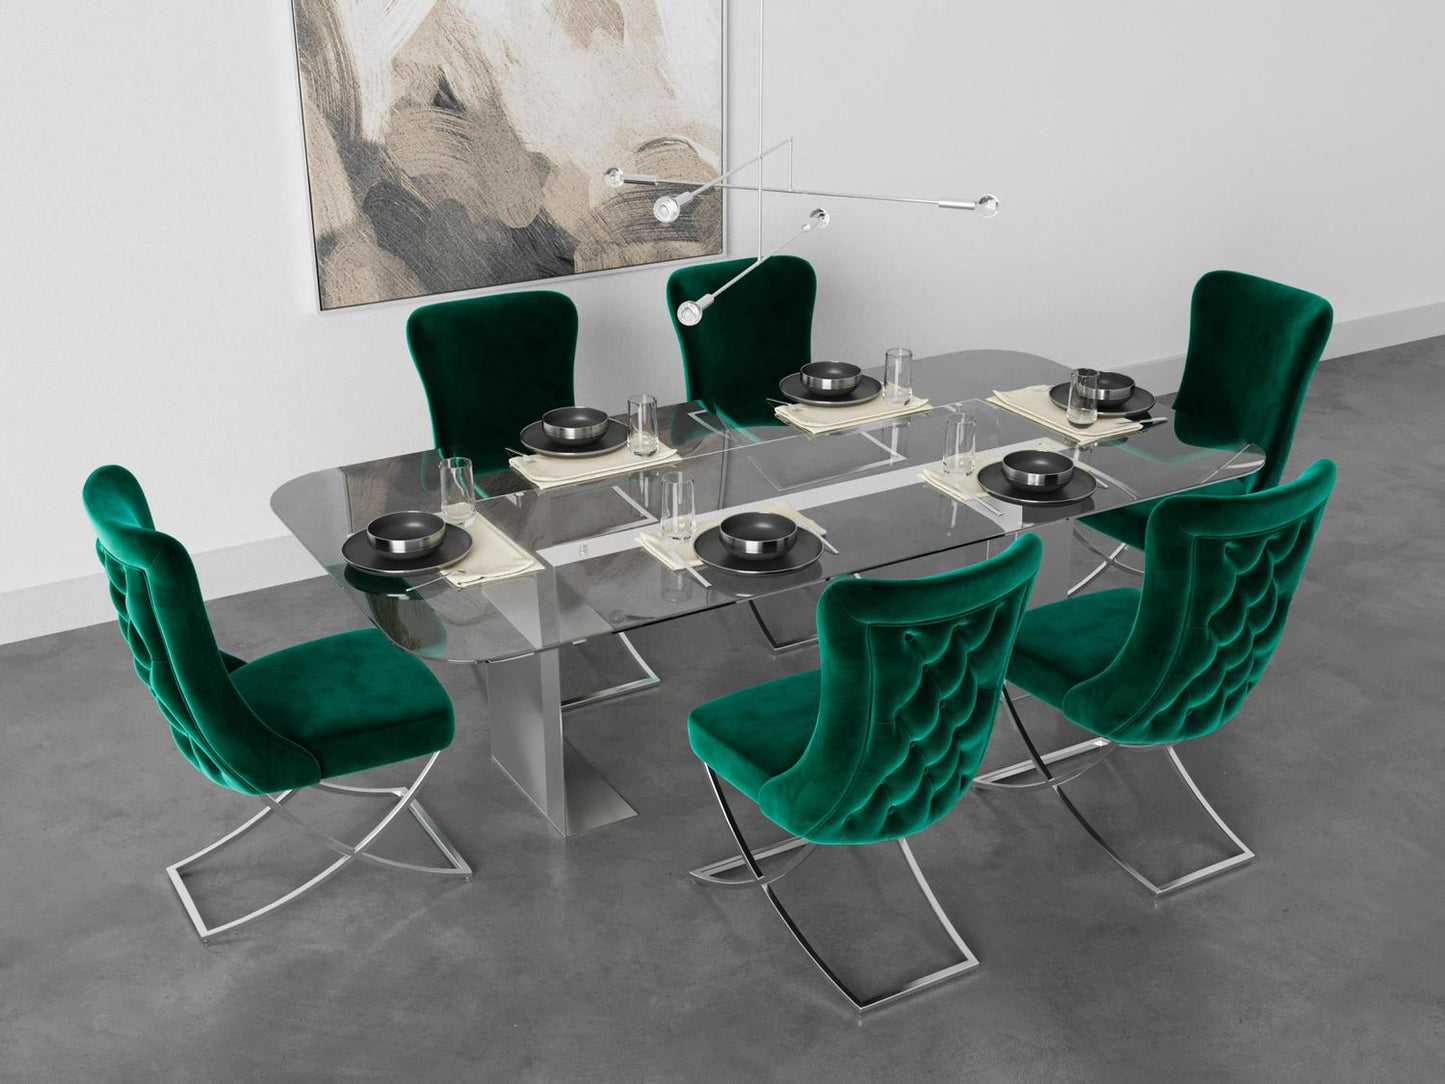 Sultan Collection Wing Back, Modern design, upholstered dining chair in Emerald Green with Silver Metal legs in a dining room for a large gathering setup.